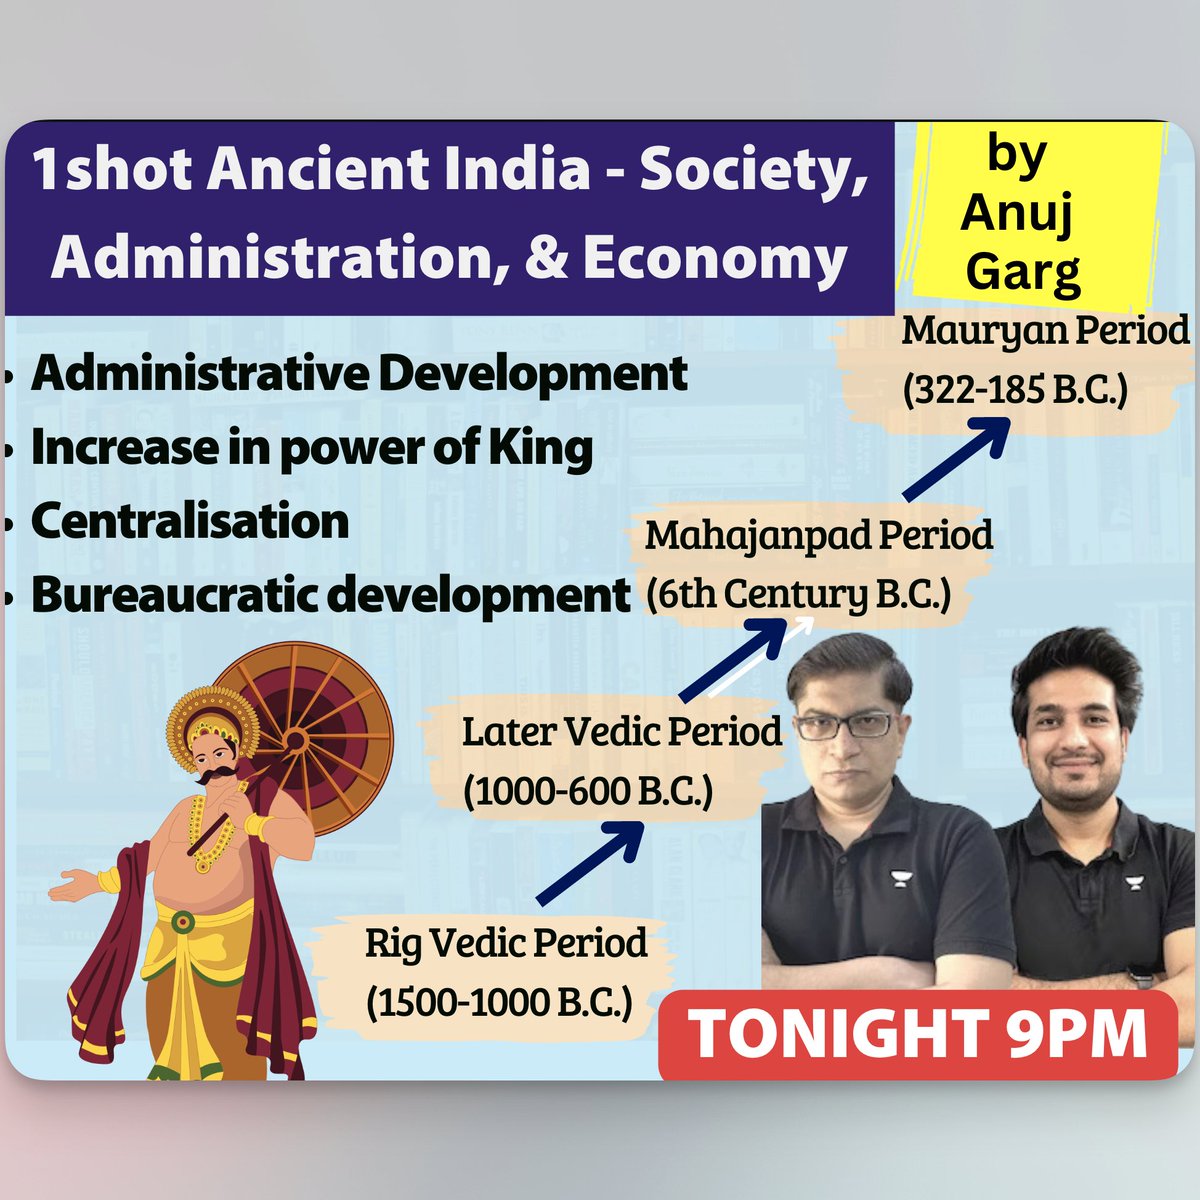 👑 1shot: Ancient India - Society, Administration & Economy by Mrunal  & @AnujGarg_AGC  sir

🧑🏻‍🏫 URL: unacademy.com/class/1shot-an… (🔖unlock Code: 'Mrunal.org')

🧑🏻‍🏫 Time: 9 PM, Today. #UPSC 

😍😍Special Learning Festival: Enroll Now for the Free Series Hosted by Mrunal: